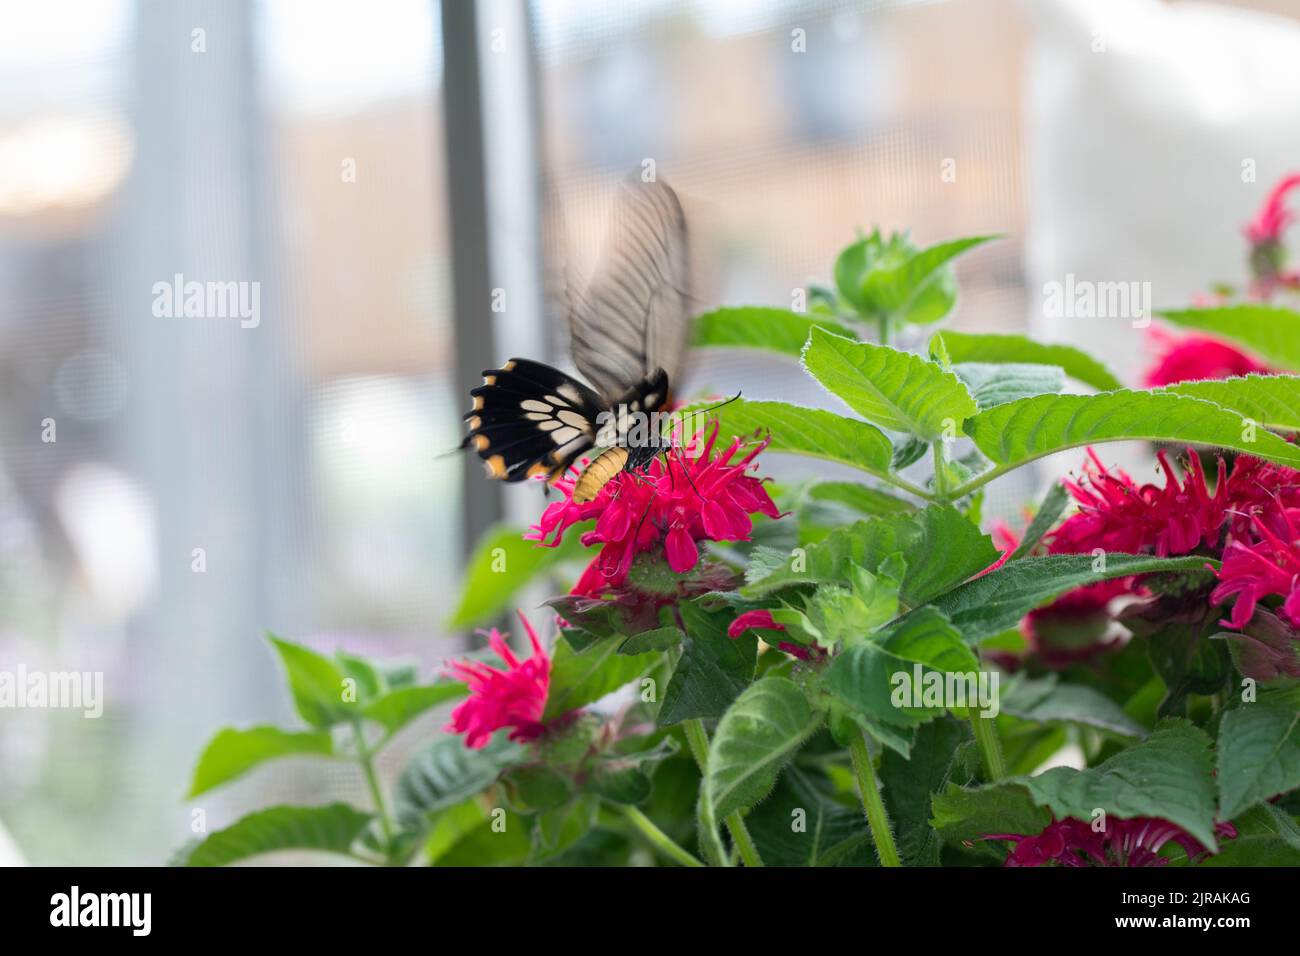 colorful exotic butterfly on flowers Stock Photo